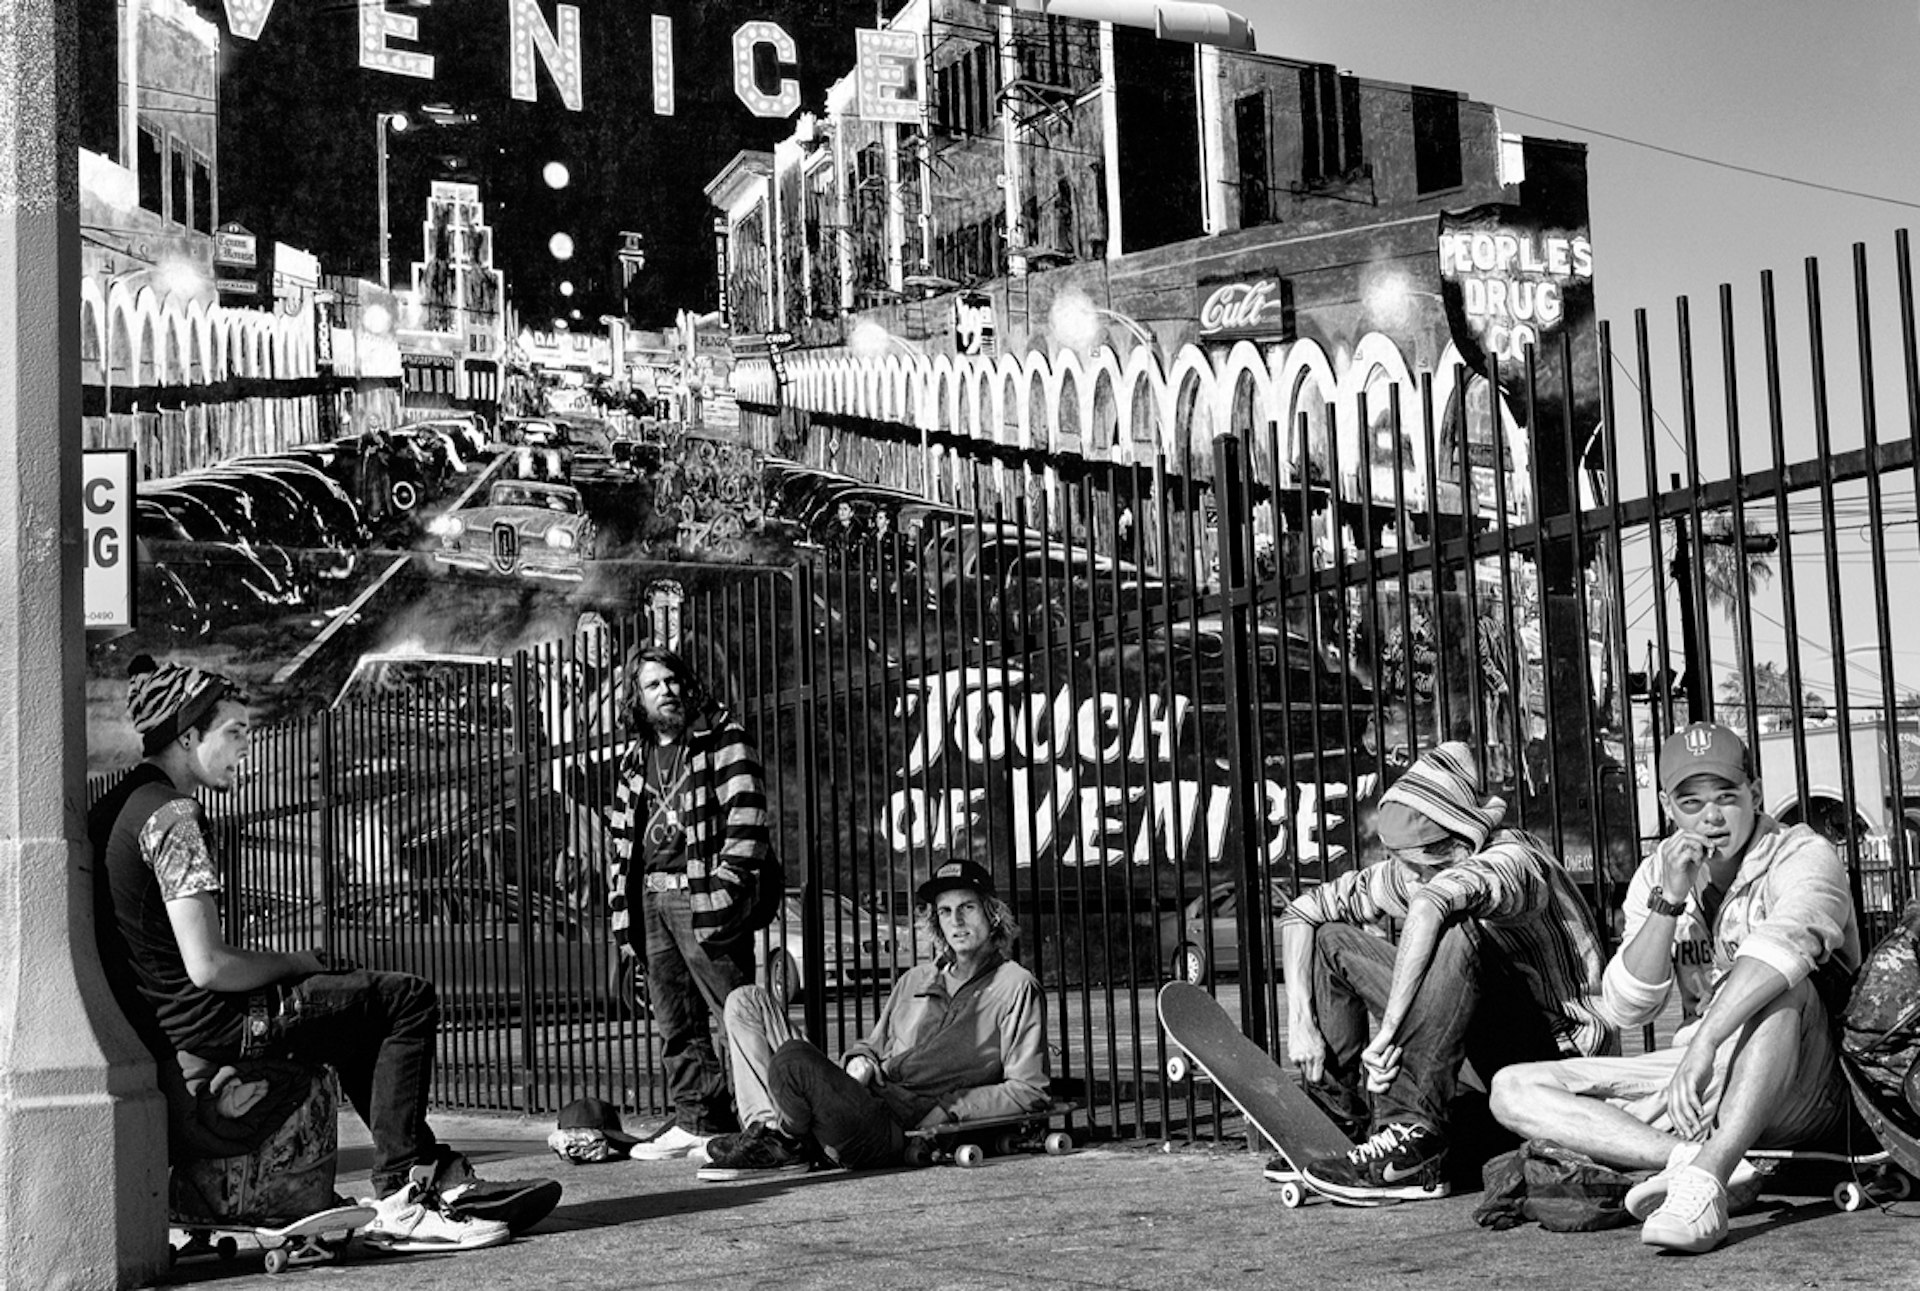 A group of young skateboarders gather to smoke marijuana in the early morning sun in front of the iconic Touch of Venice mural on Wind- ward Avenue.© Dotan Saguy